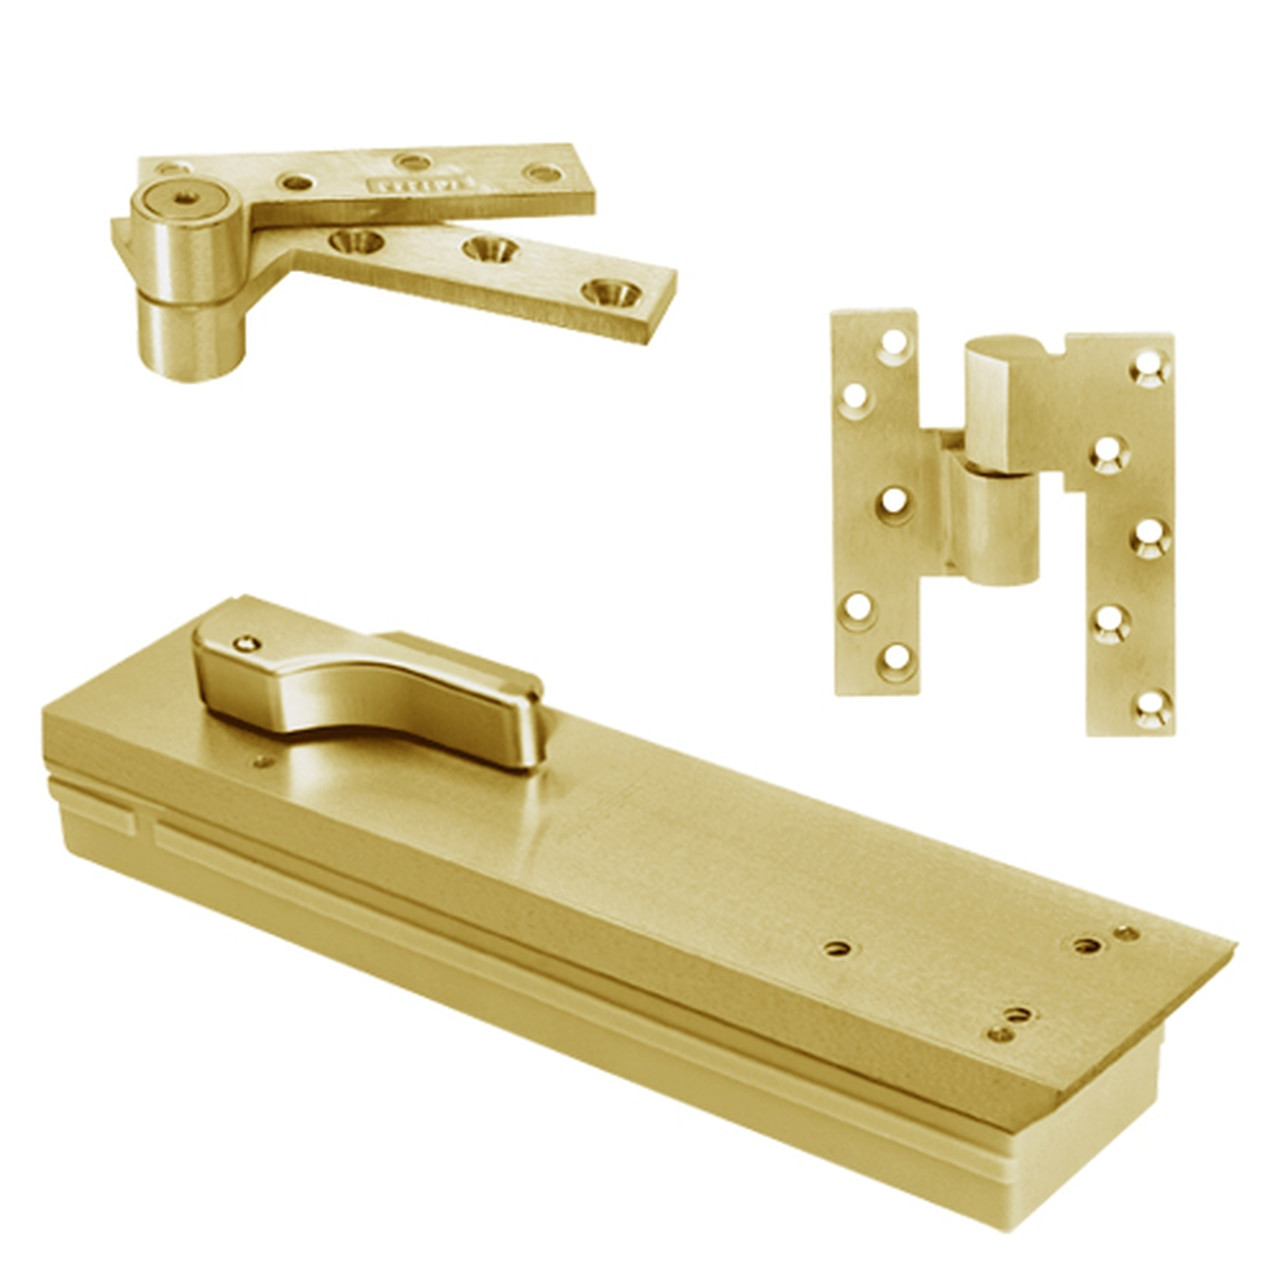 FQ5105NBC-LCC-RH-606 Rixson Q51 Series Fire Rated 3/4" Offset Hung Shallow Depth Floor Closers in Satin Brass Finish